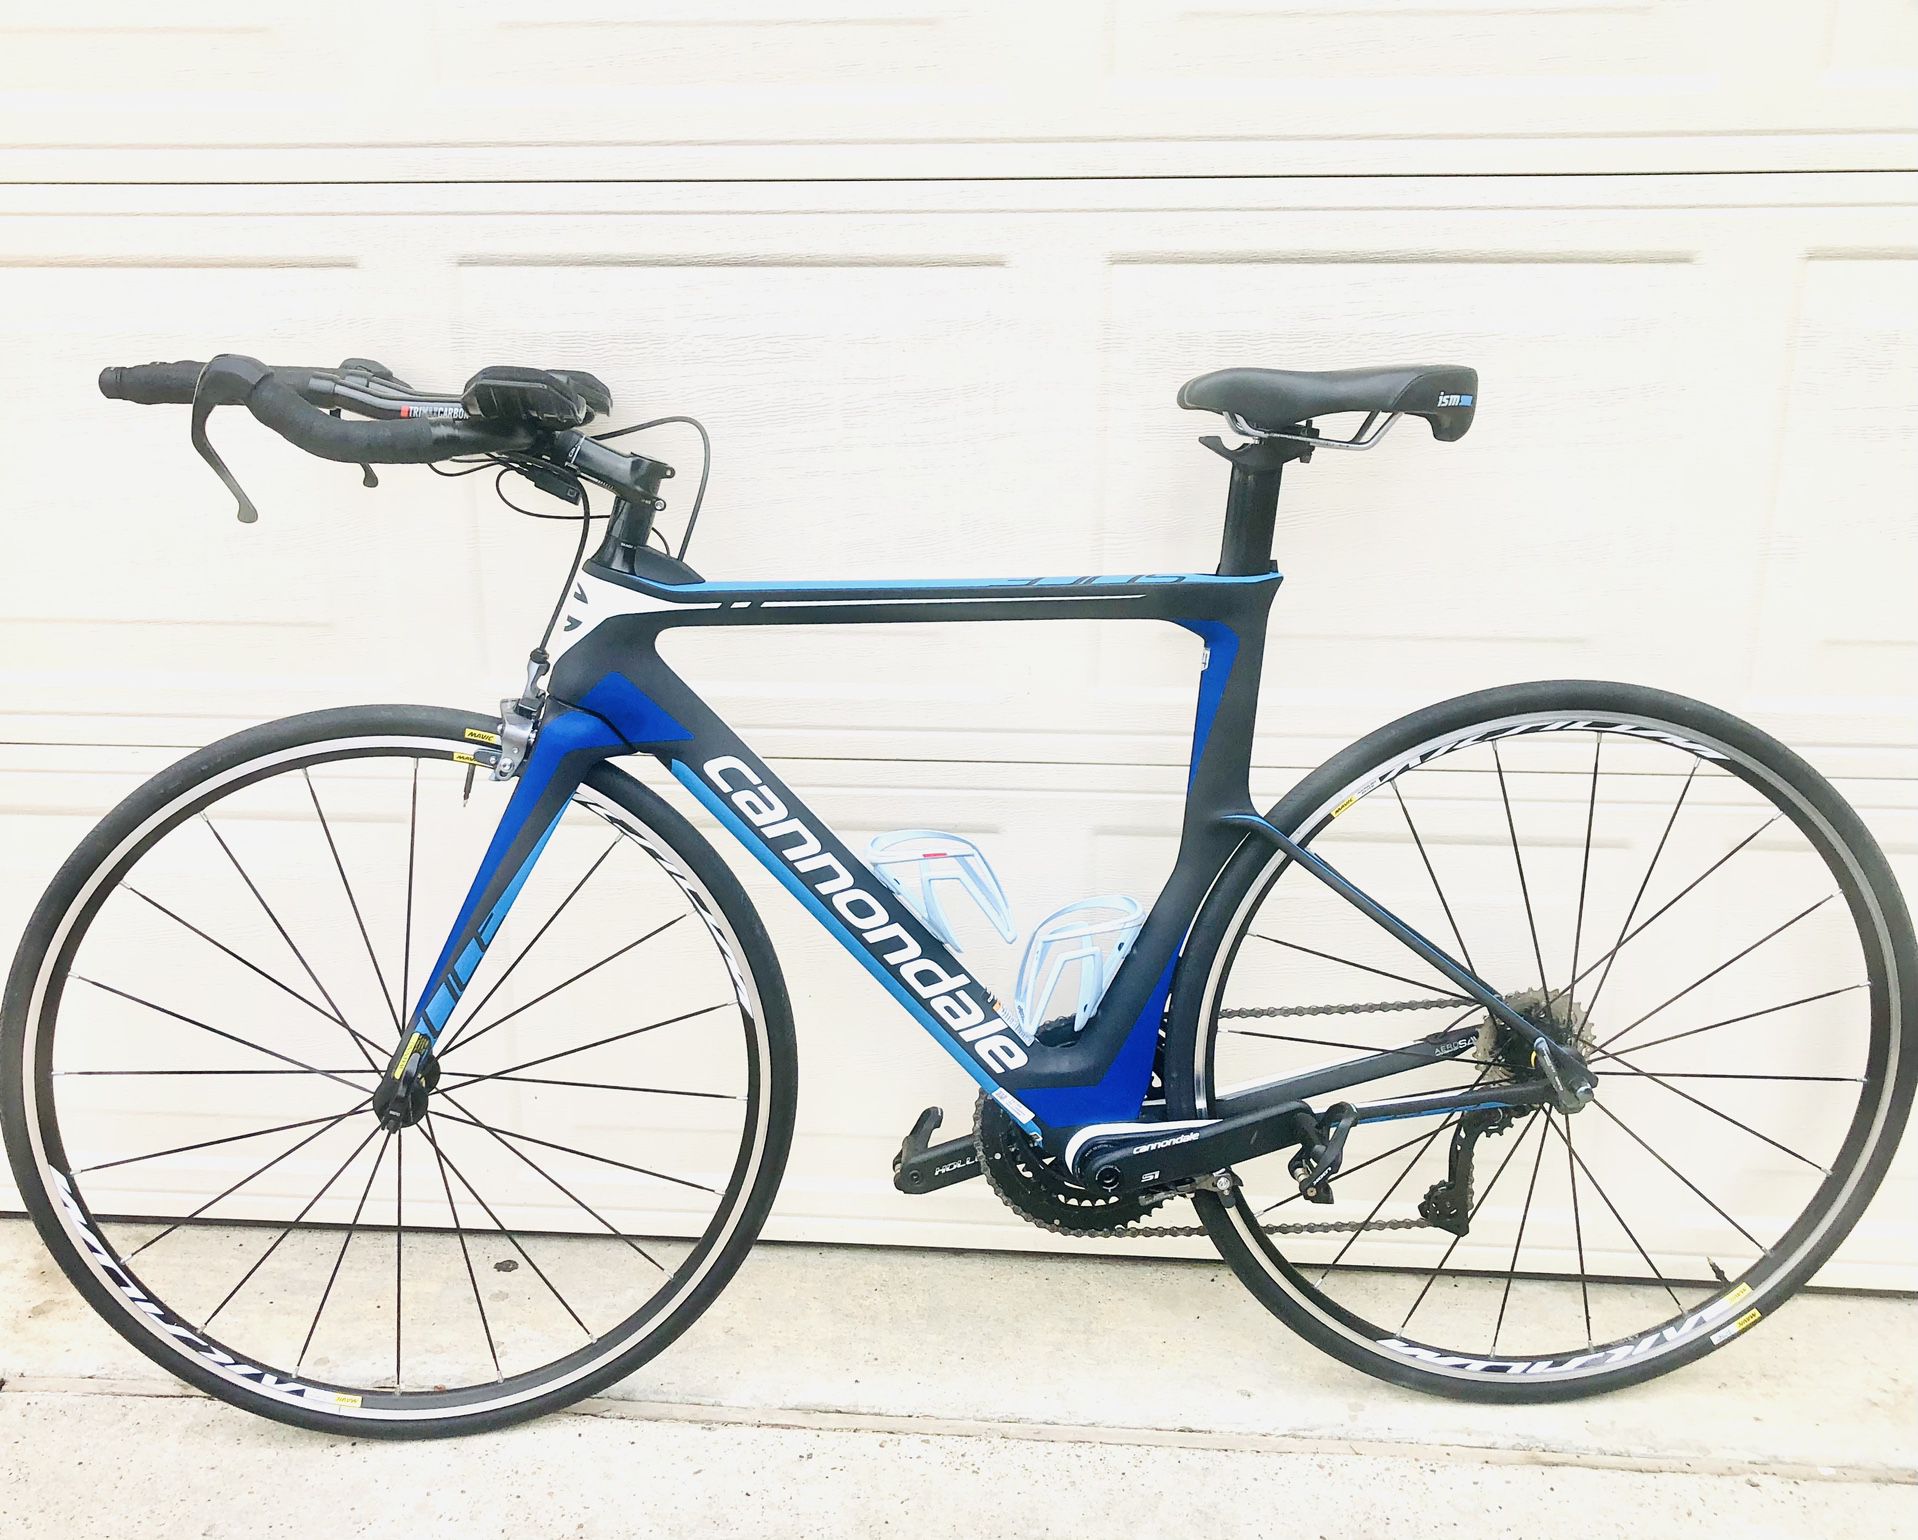 Cannondale Carbon Bike With DI2